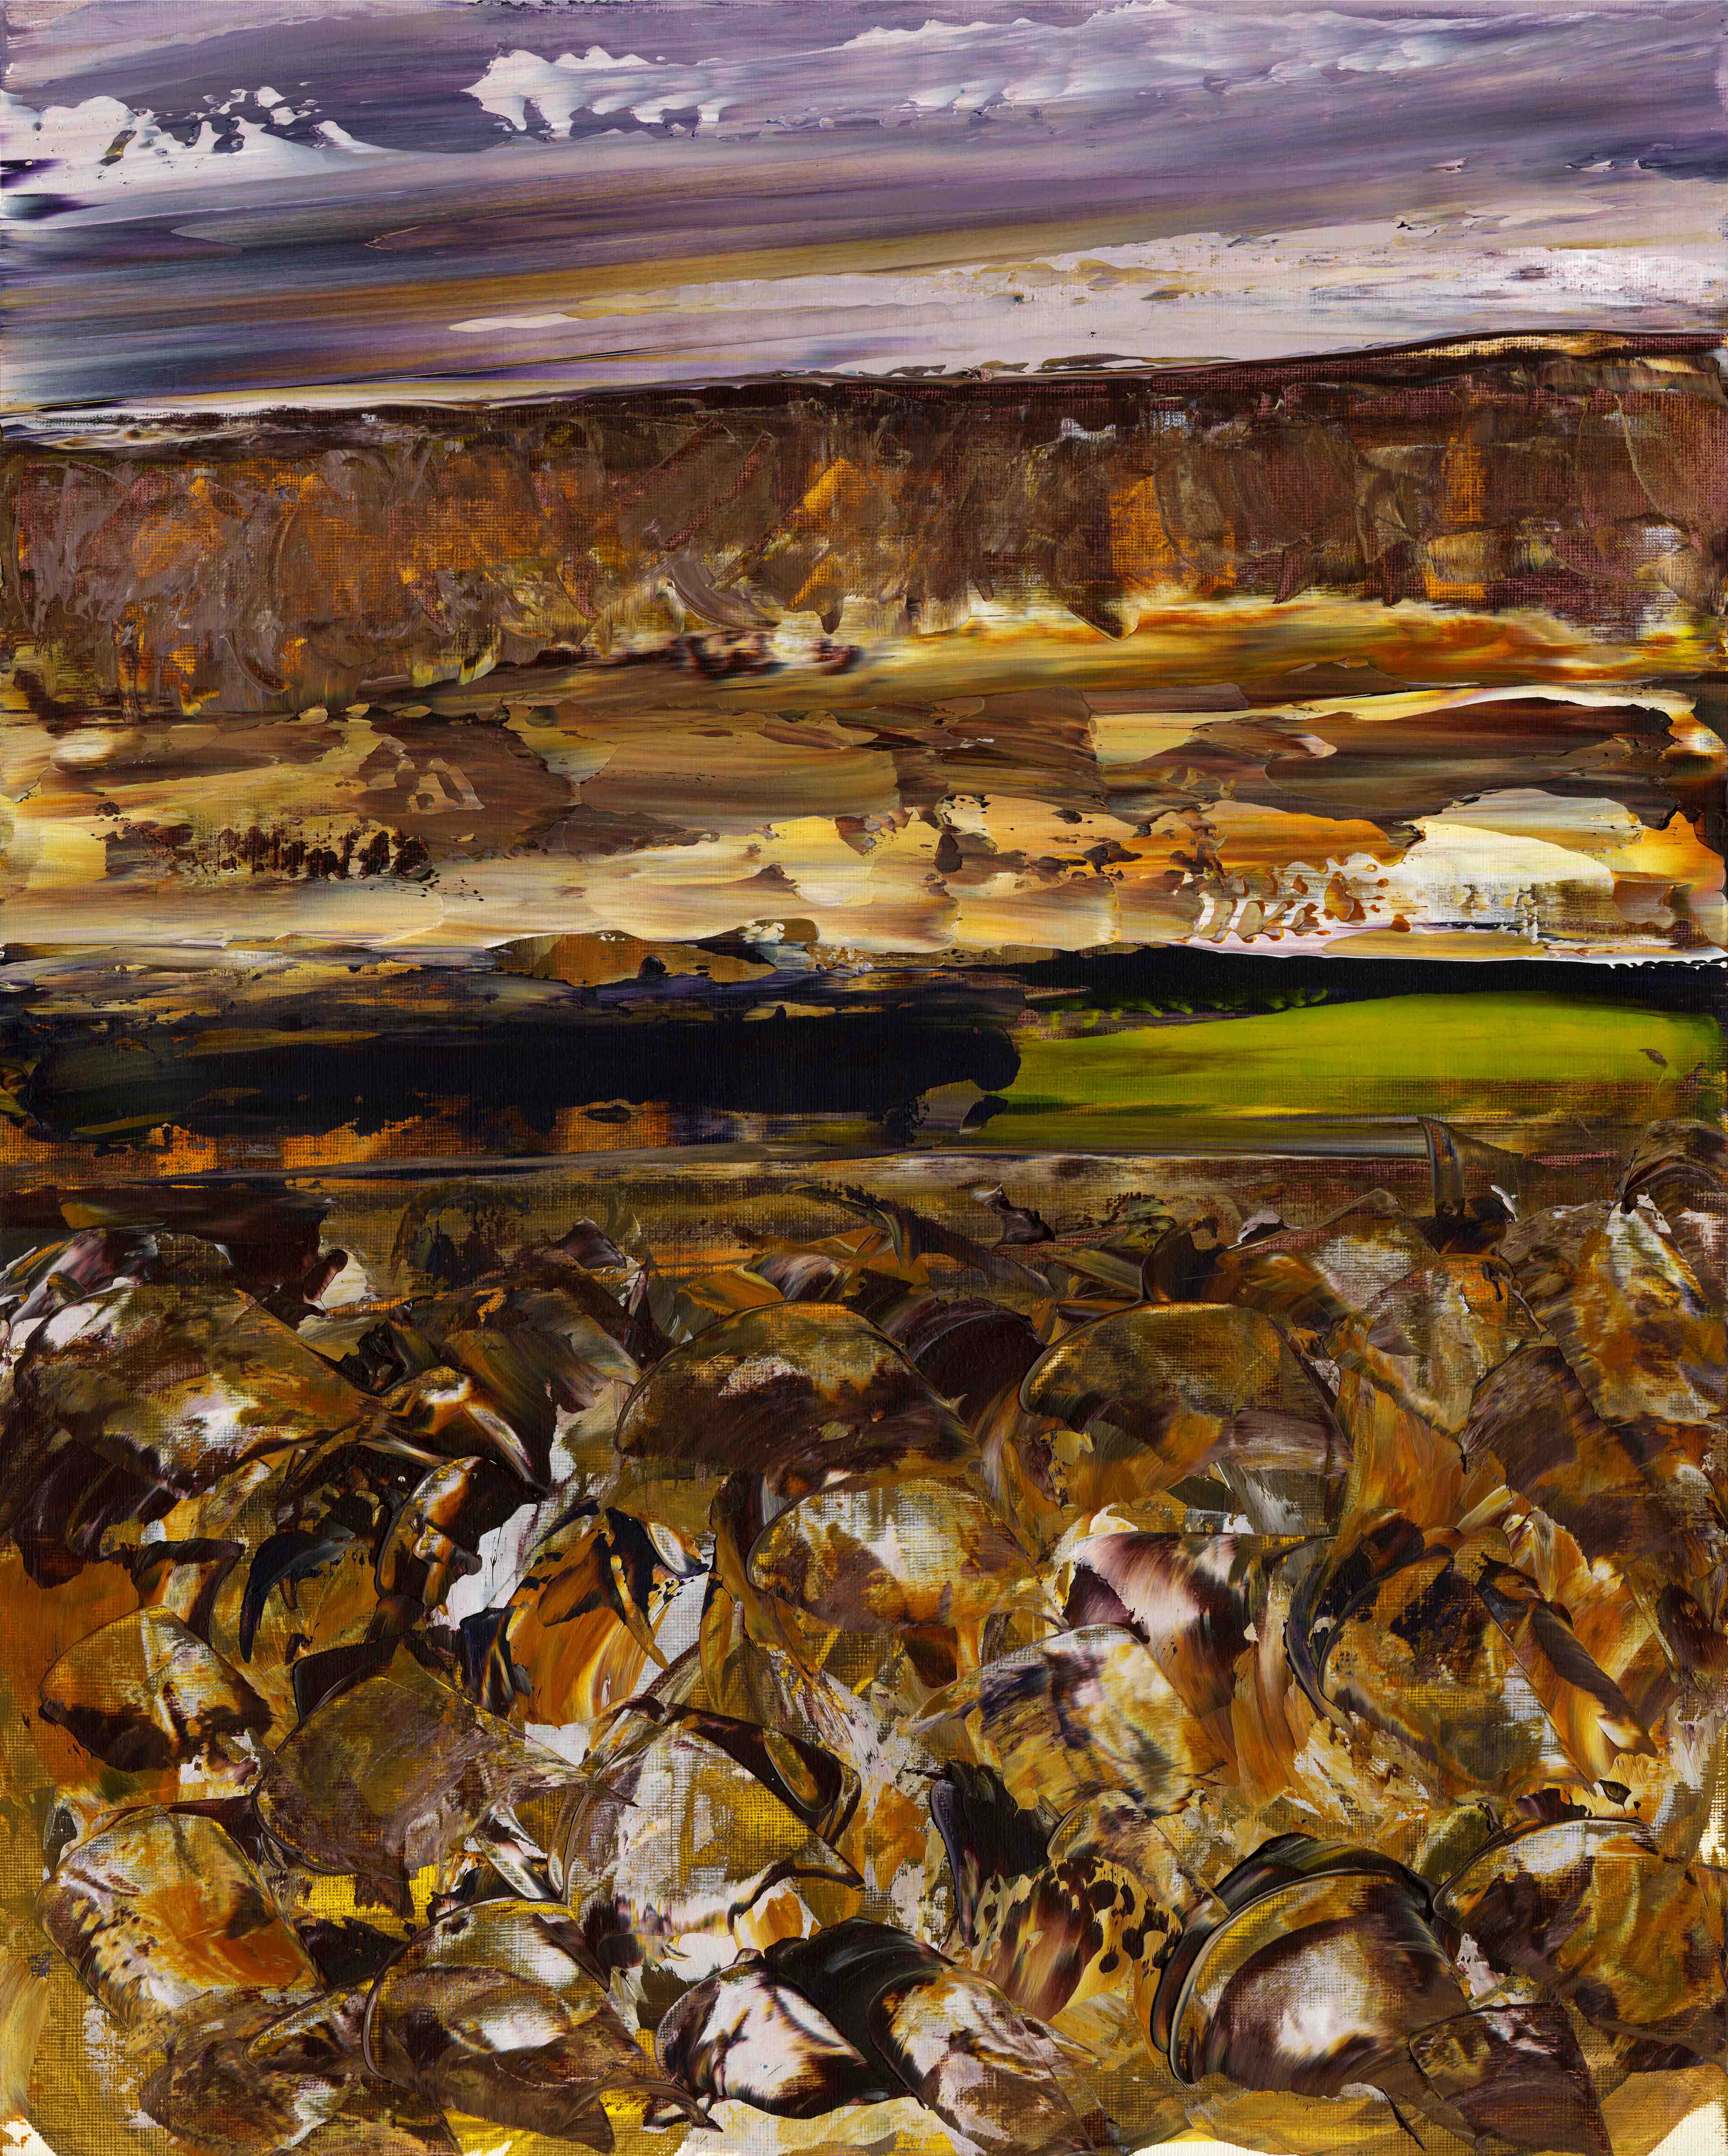 A painting of stones and the landscape of the North Coast.